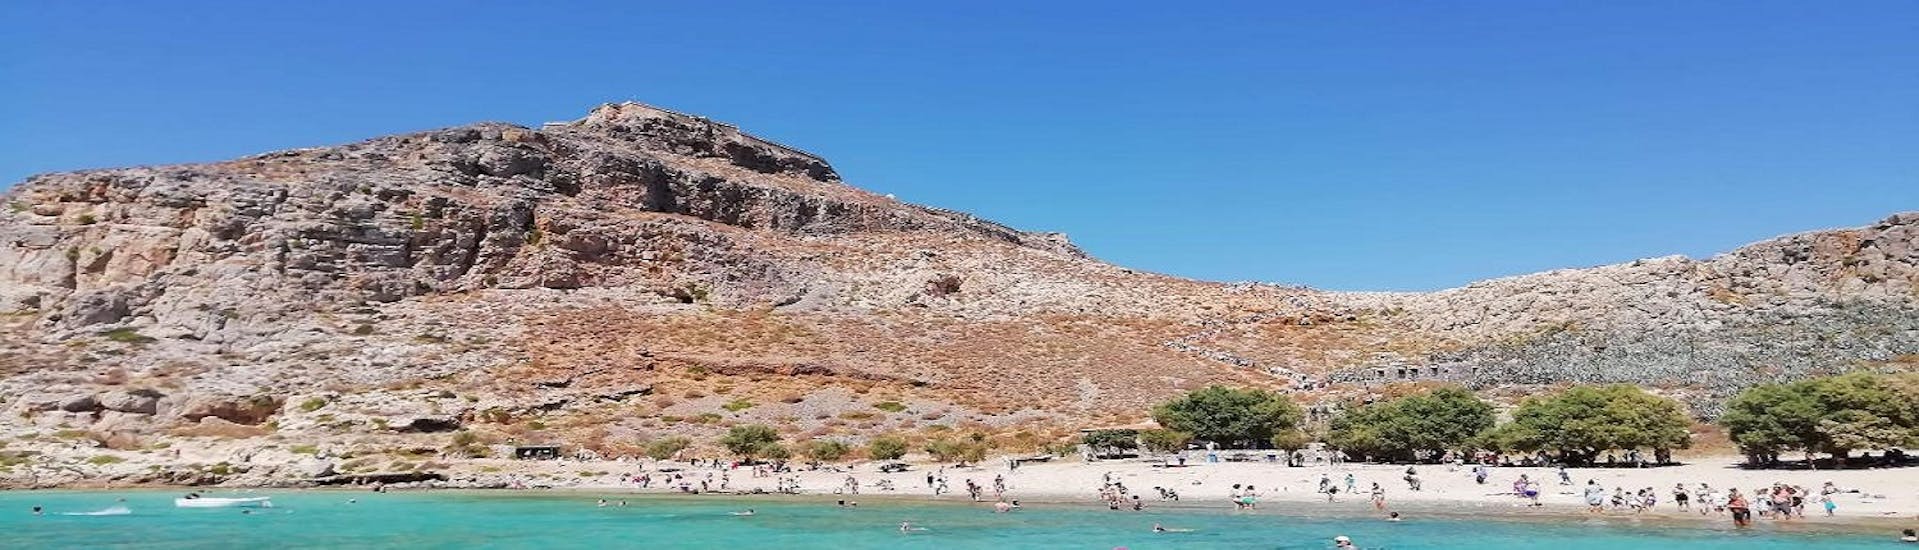 The clear water of menies beach, where you can swim during the Private Boat Trip to Menies Beach from Kissamos with Chania Balos Cruises.